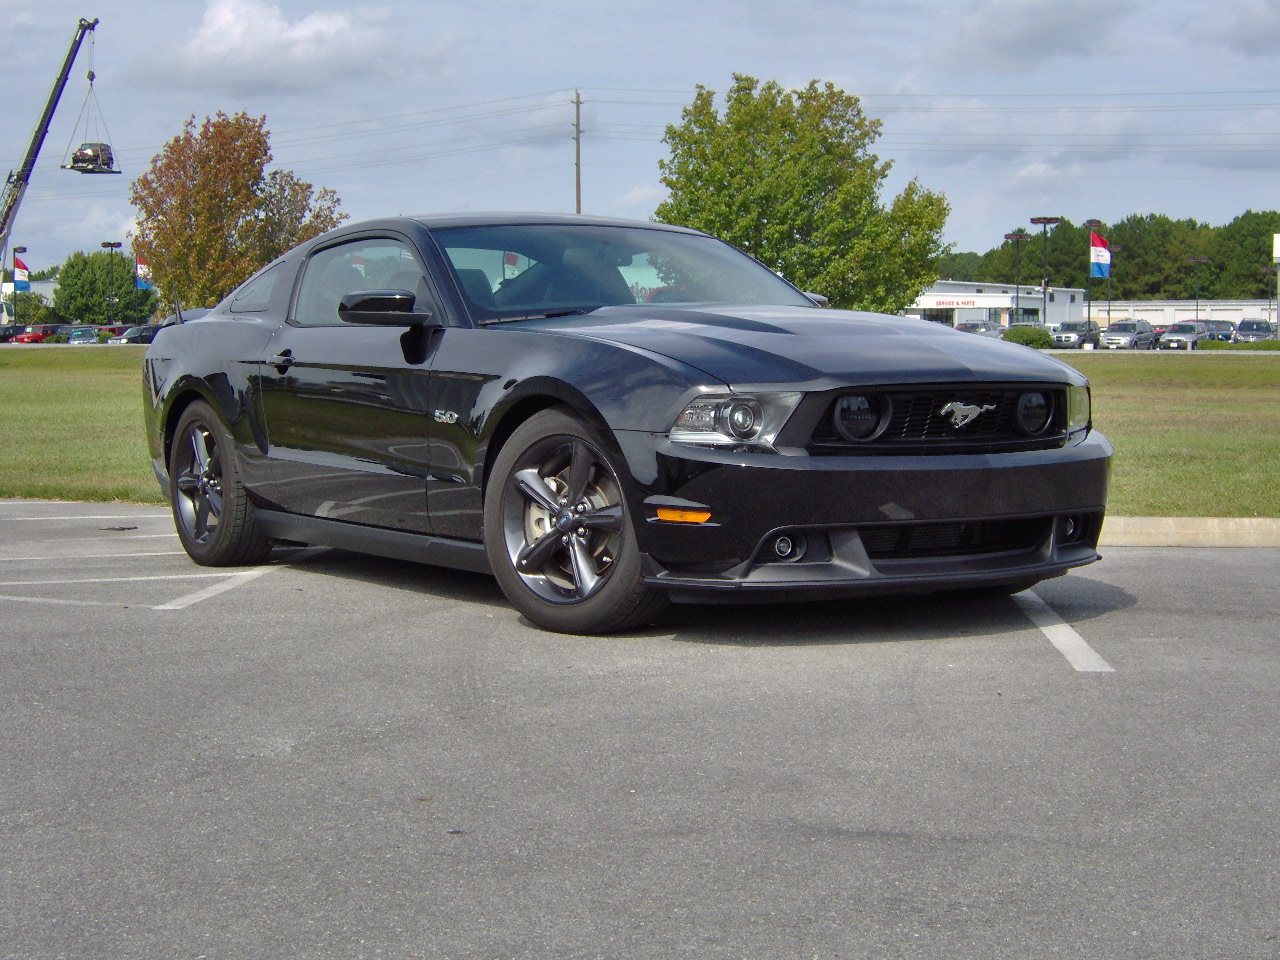 2011 Ford mustang gt quarter mile times #9